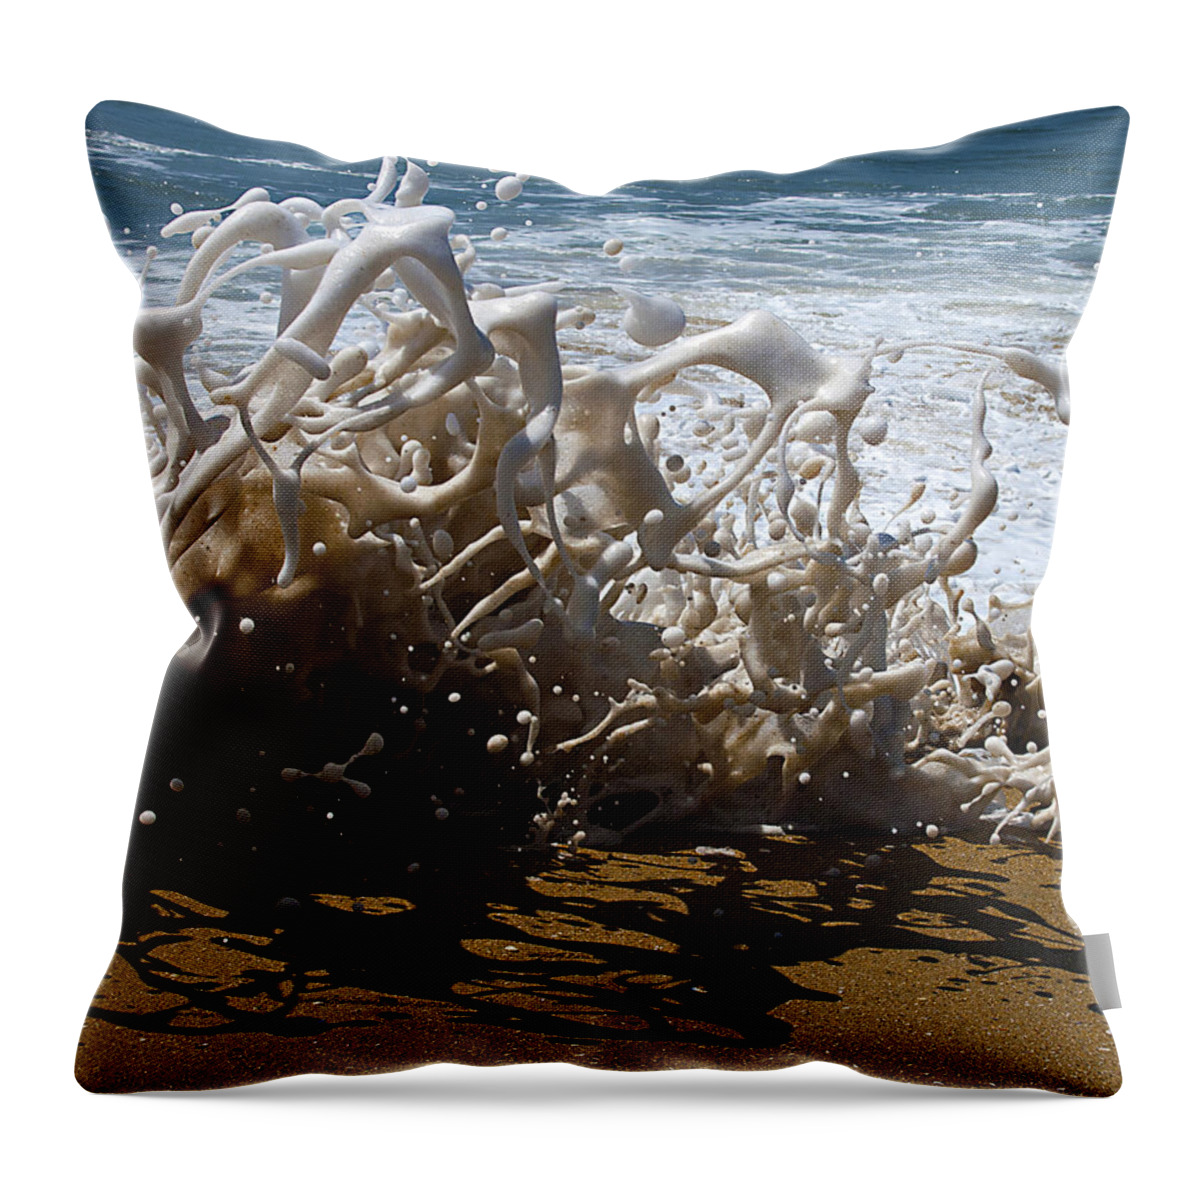 Surf Throw Pillow featuring the photograph Shorebreak - The Wedge by Joe Schofield